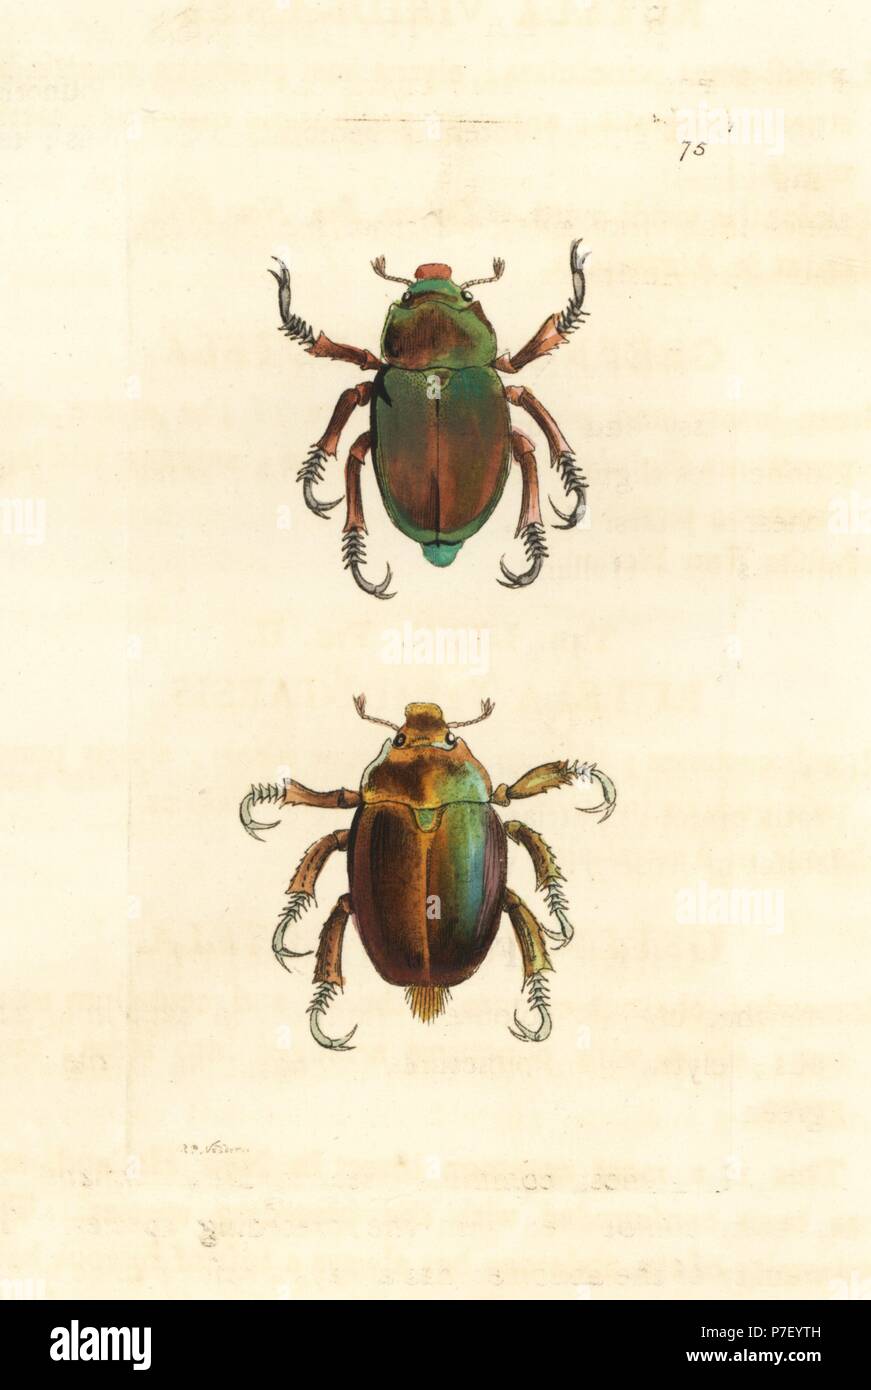 King Christmas beetle, Anoplognathus viridiaeneus, and Christmas beetle, Anoplognathus viriditarsis (Green brassy rutela, Rutela viridi-aenea, and green-footed rutela, Rutela viridi-tarsis). Handcoloured copperplate engraving drawn and engraved by Richard Polydore Nodder from William Elford Leach's Zoological Miscellany, McMillan, London, 1815. Stock Photo